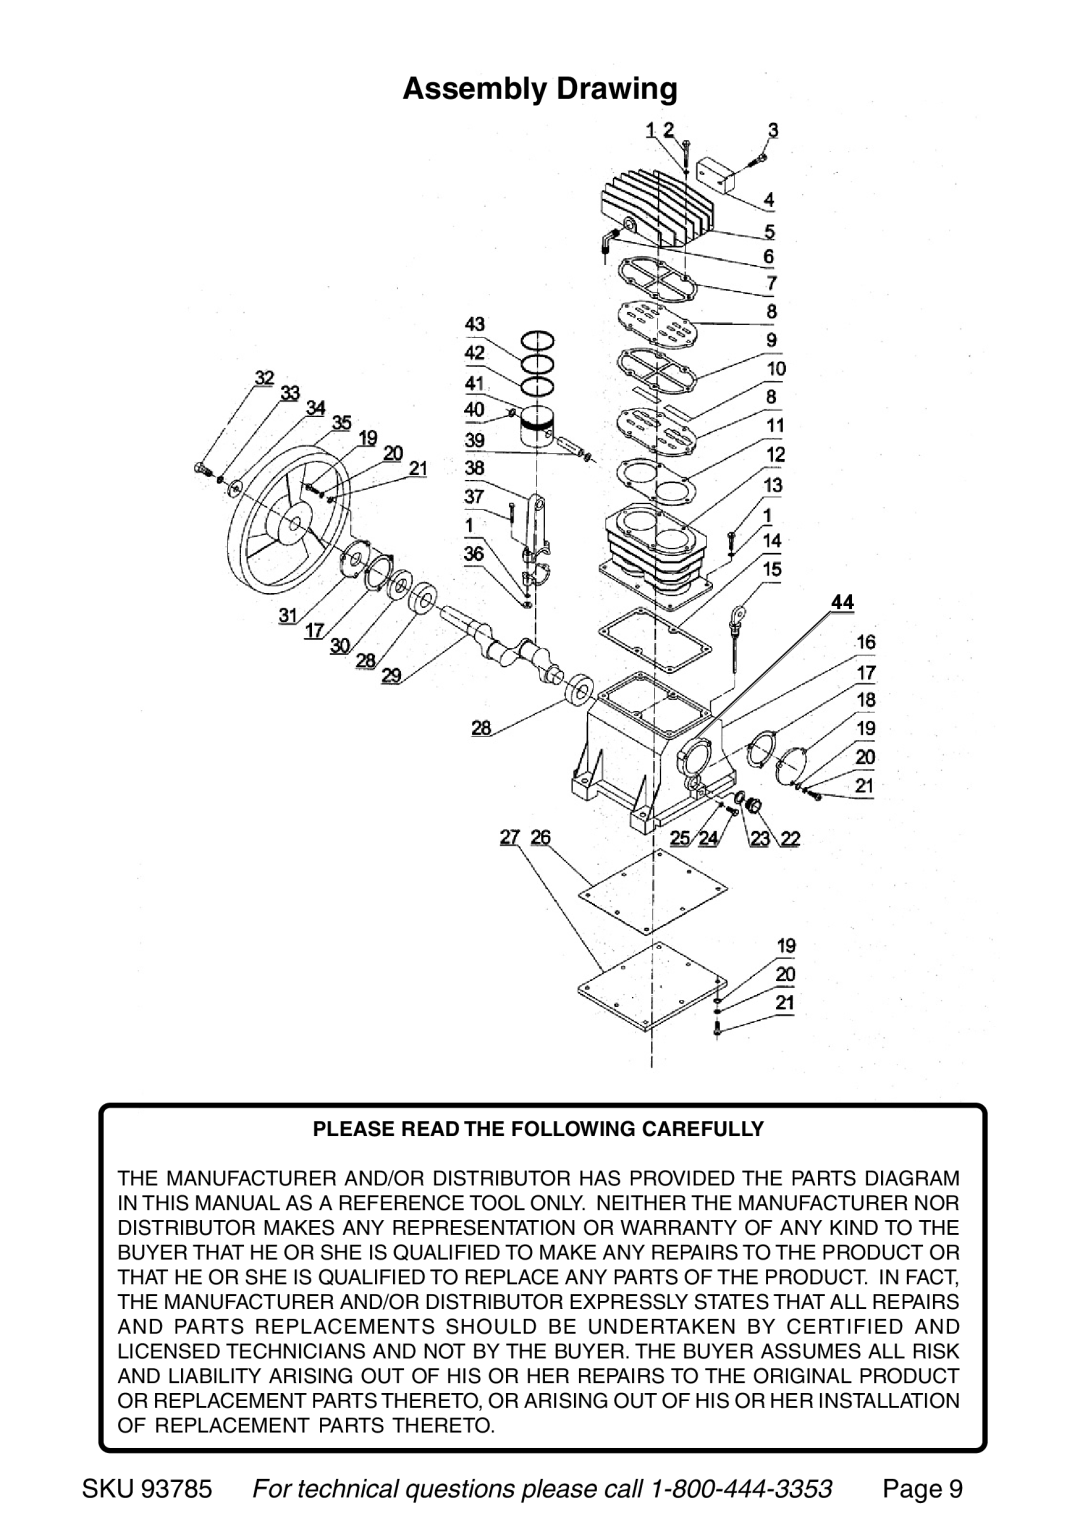 Harbor Freight Tools 93785 operating instructions Assembly Drawing, Please Read the Following Carefully 